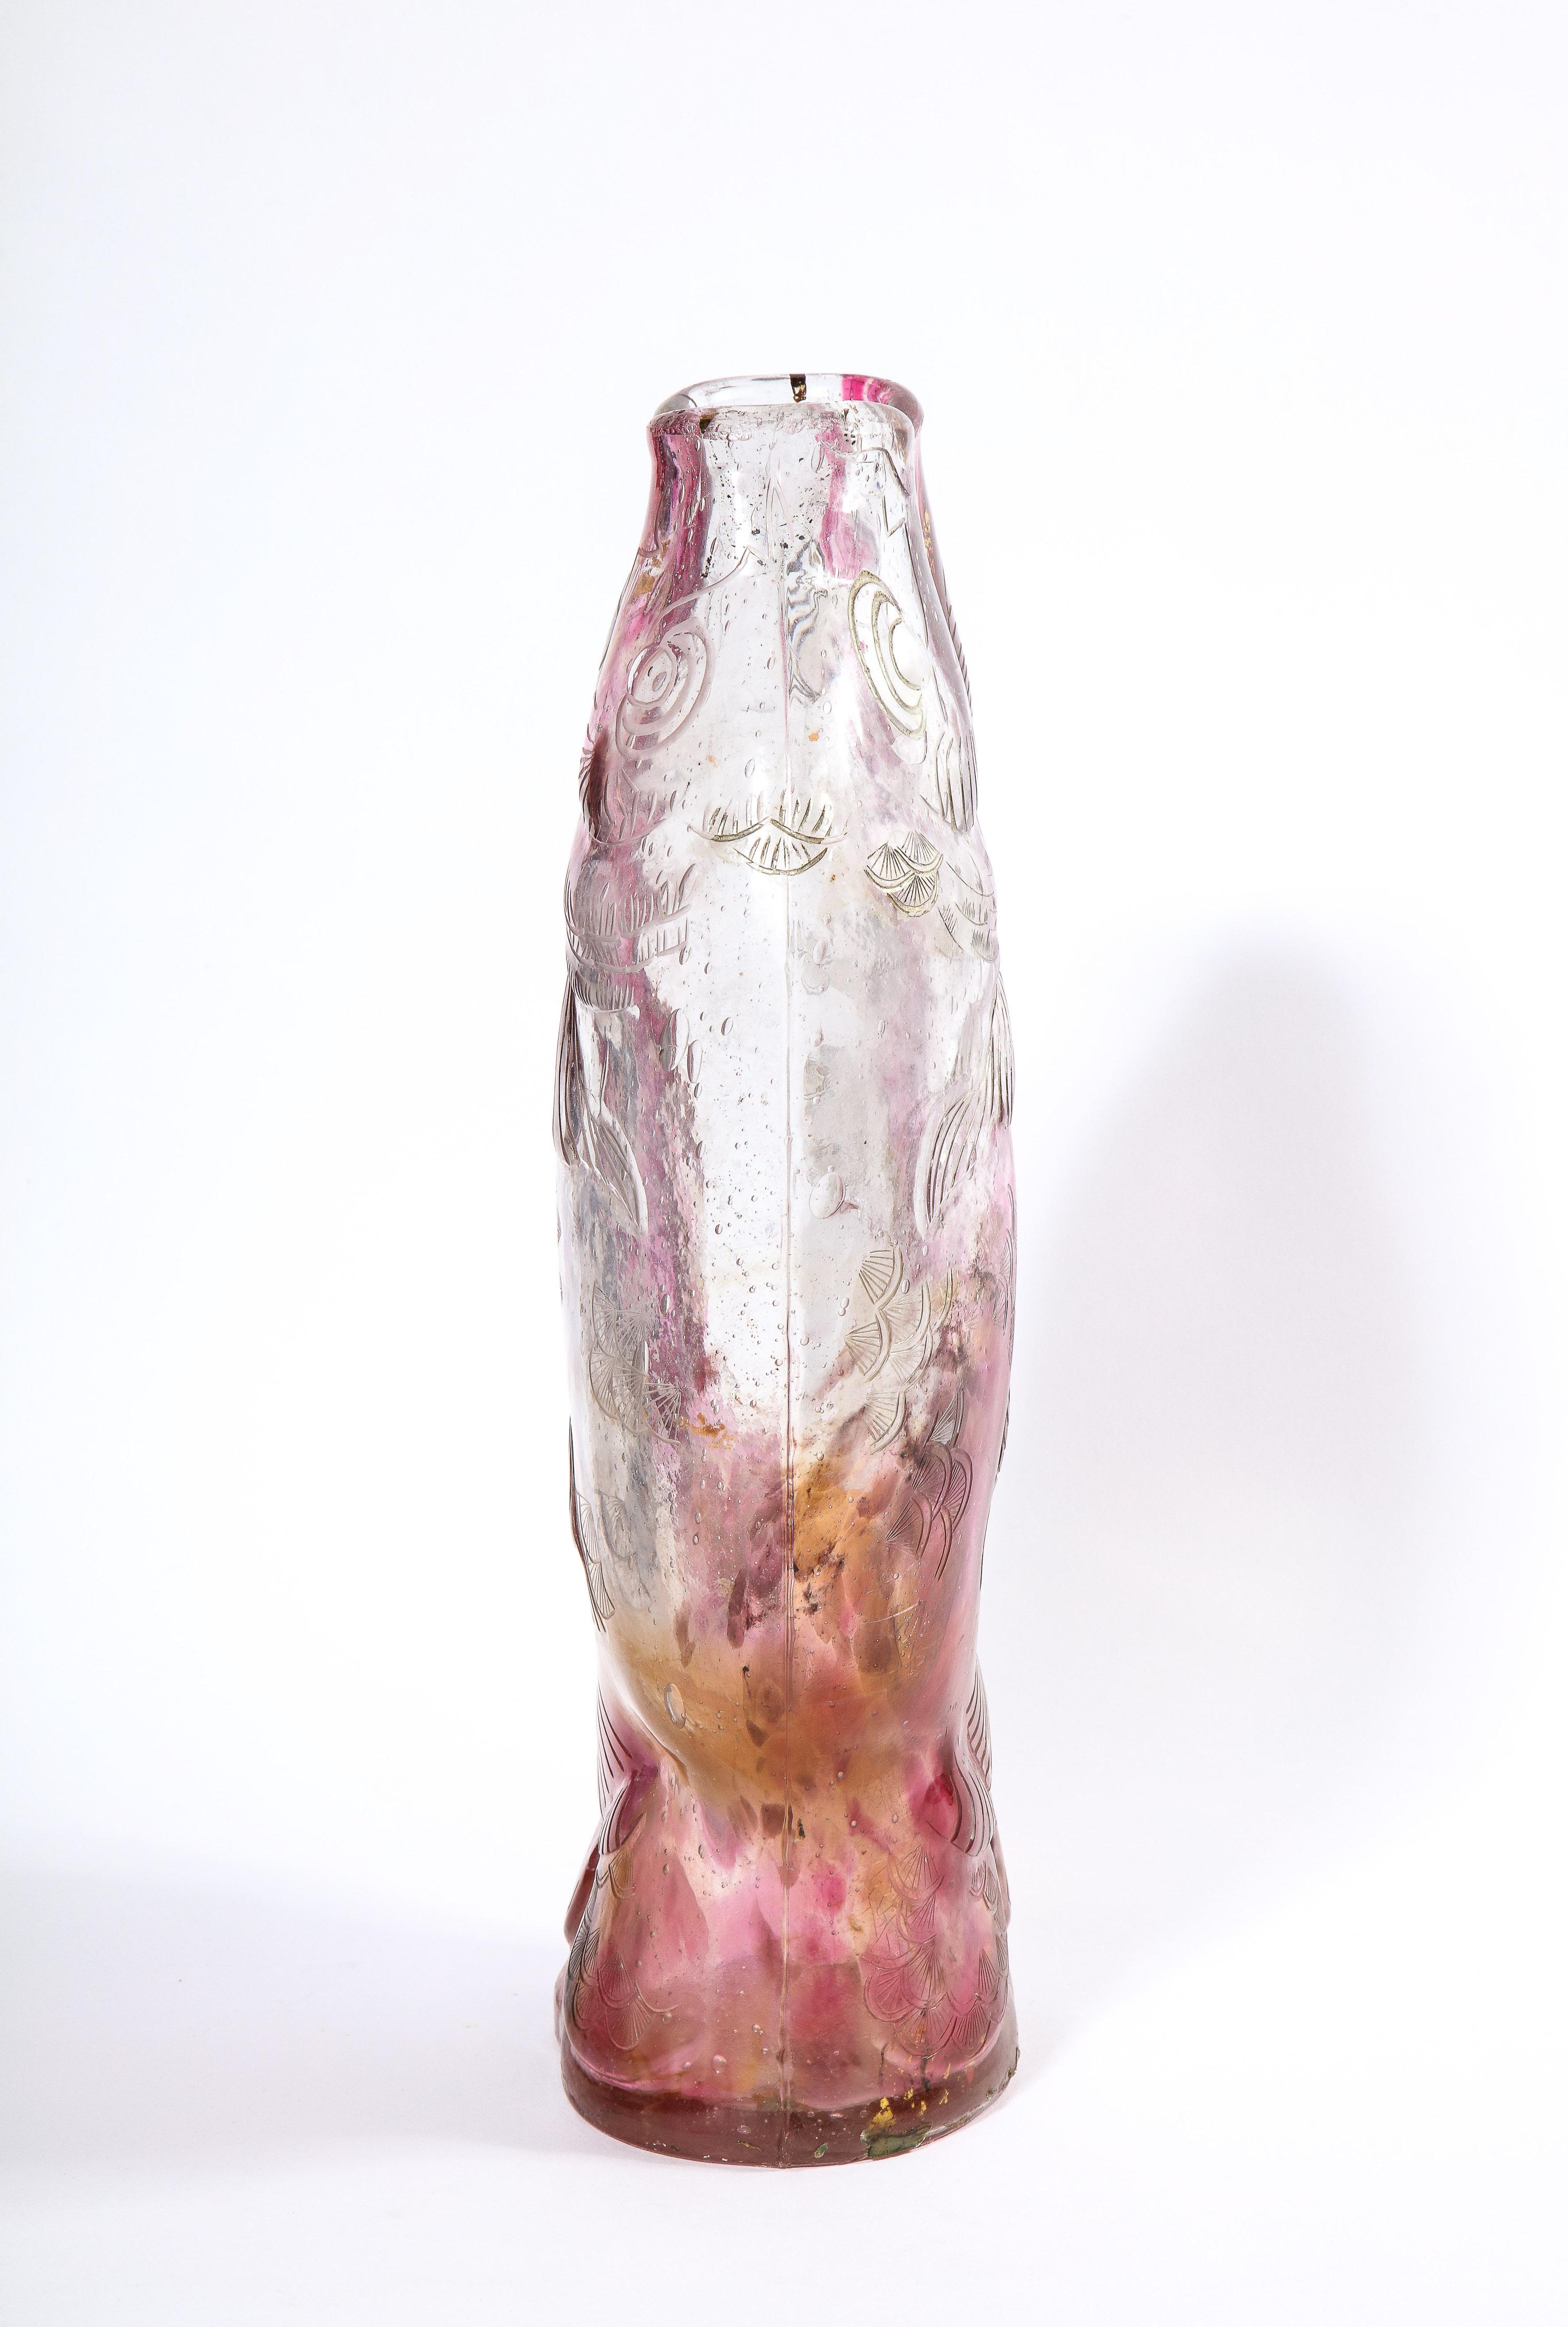 Emile Galle, A Rare & Important Ormolu-Mounted Double Carp Fish Pink-Glass Vase For Sale 7